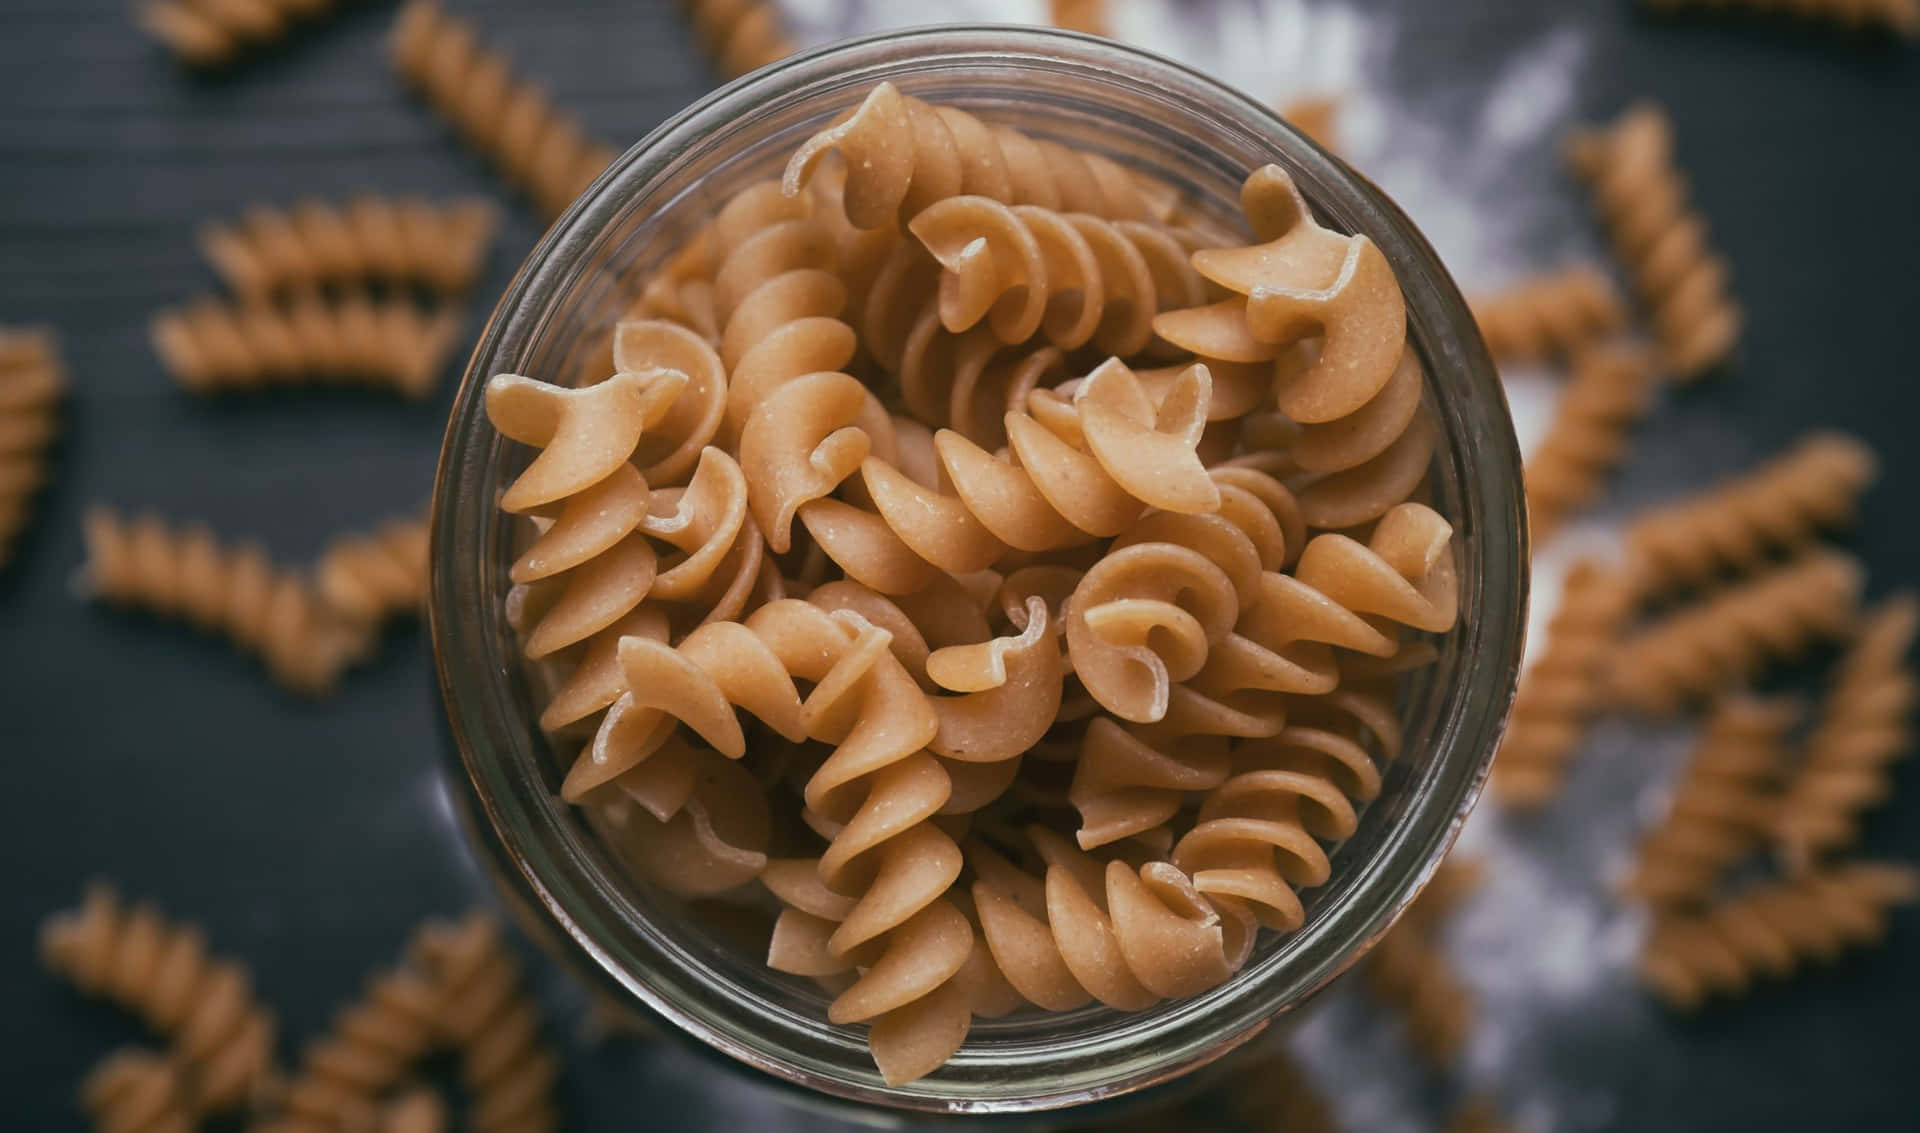 A Jar Of Pasta Sitting On A Table